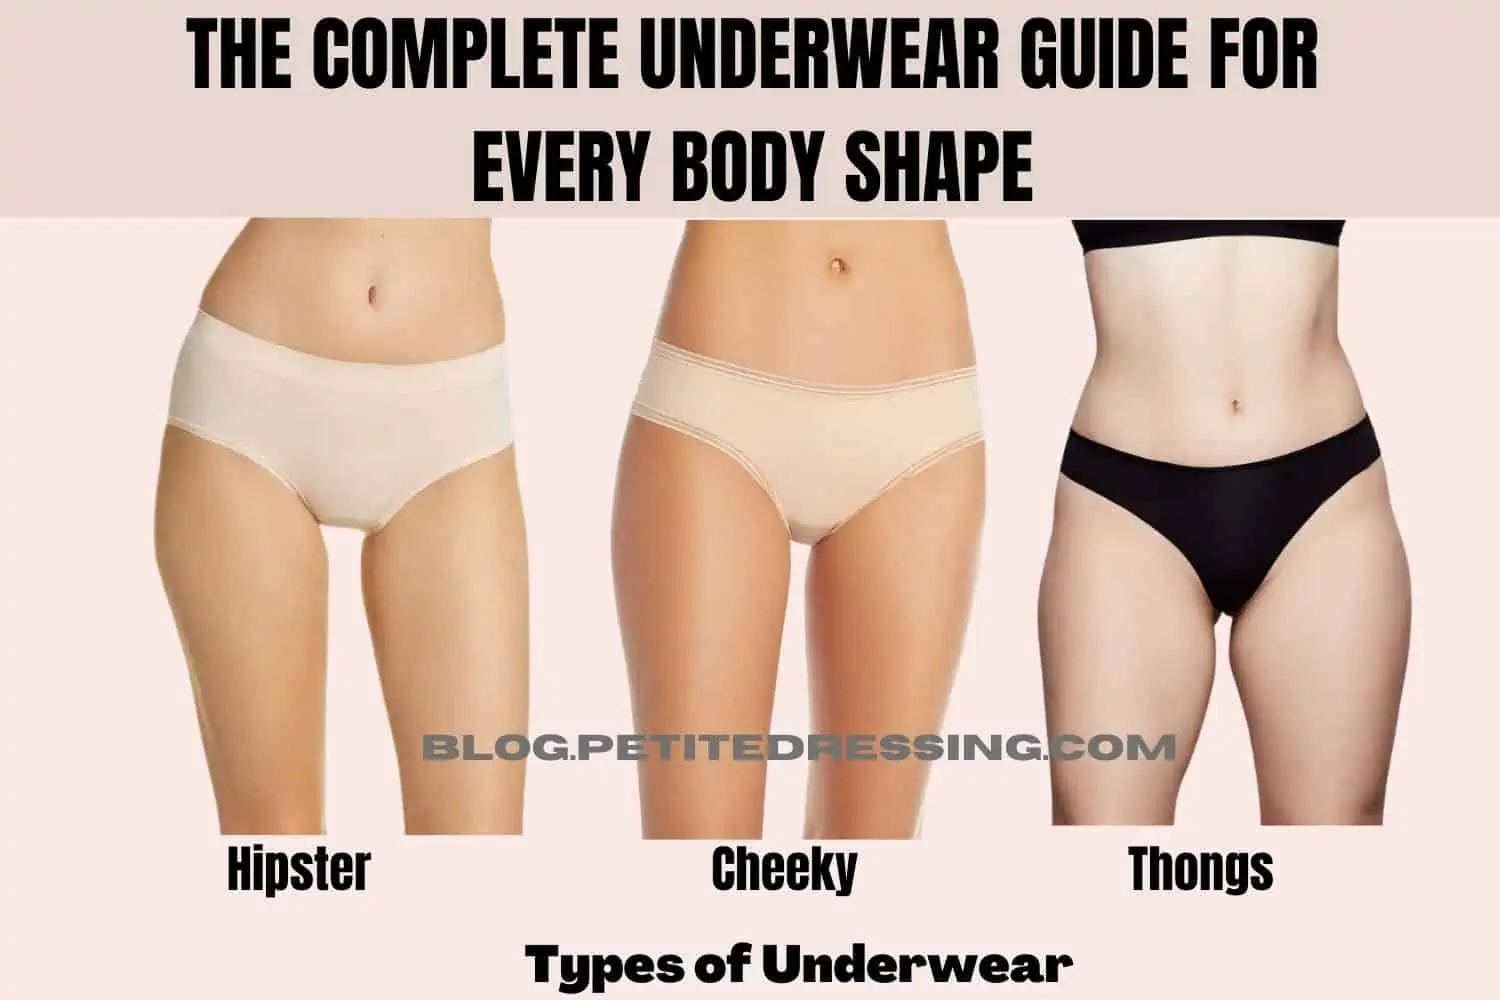 So which knickers will flatter your figure?